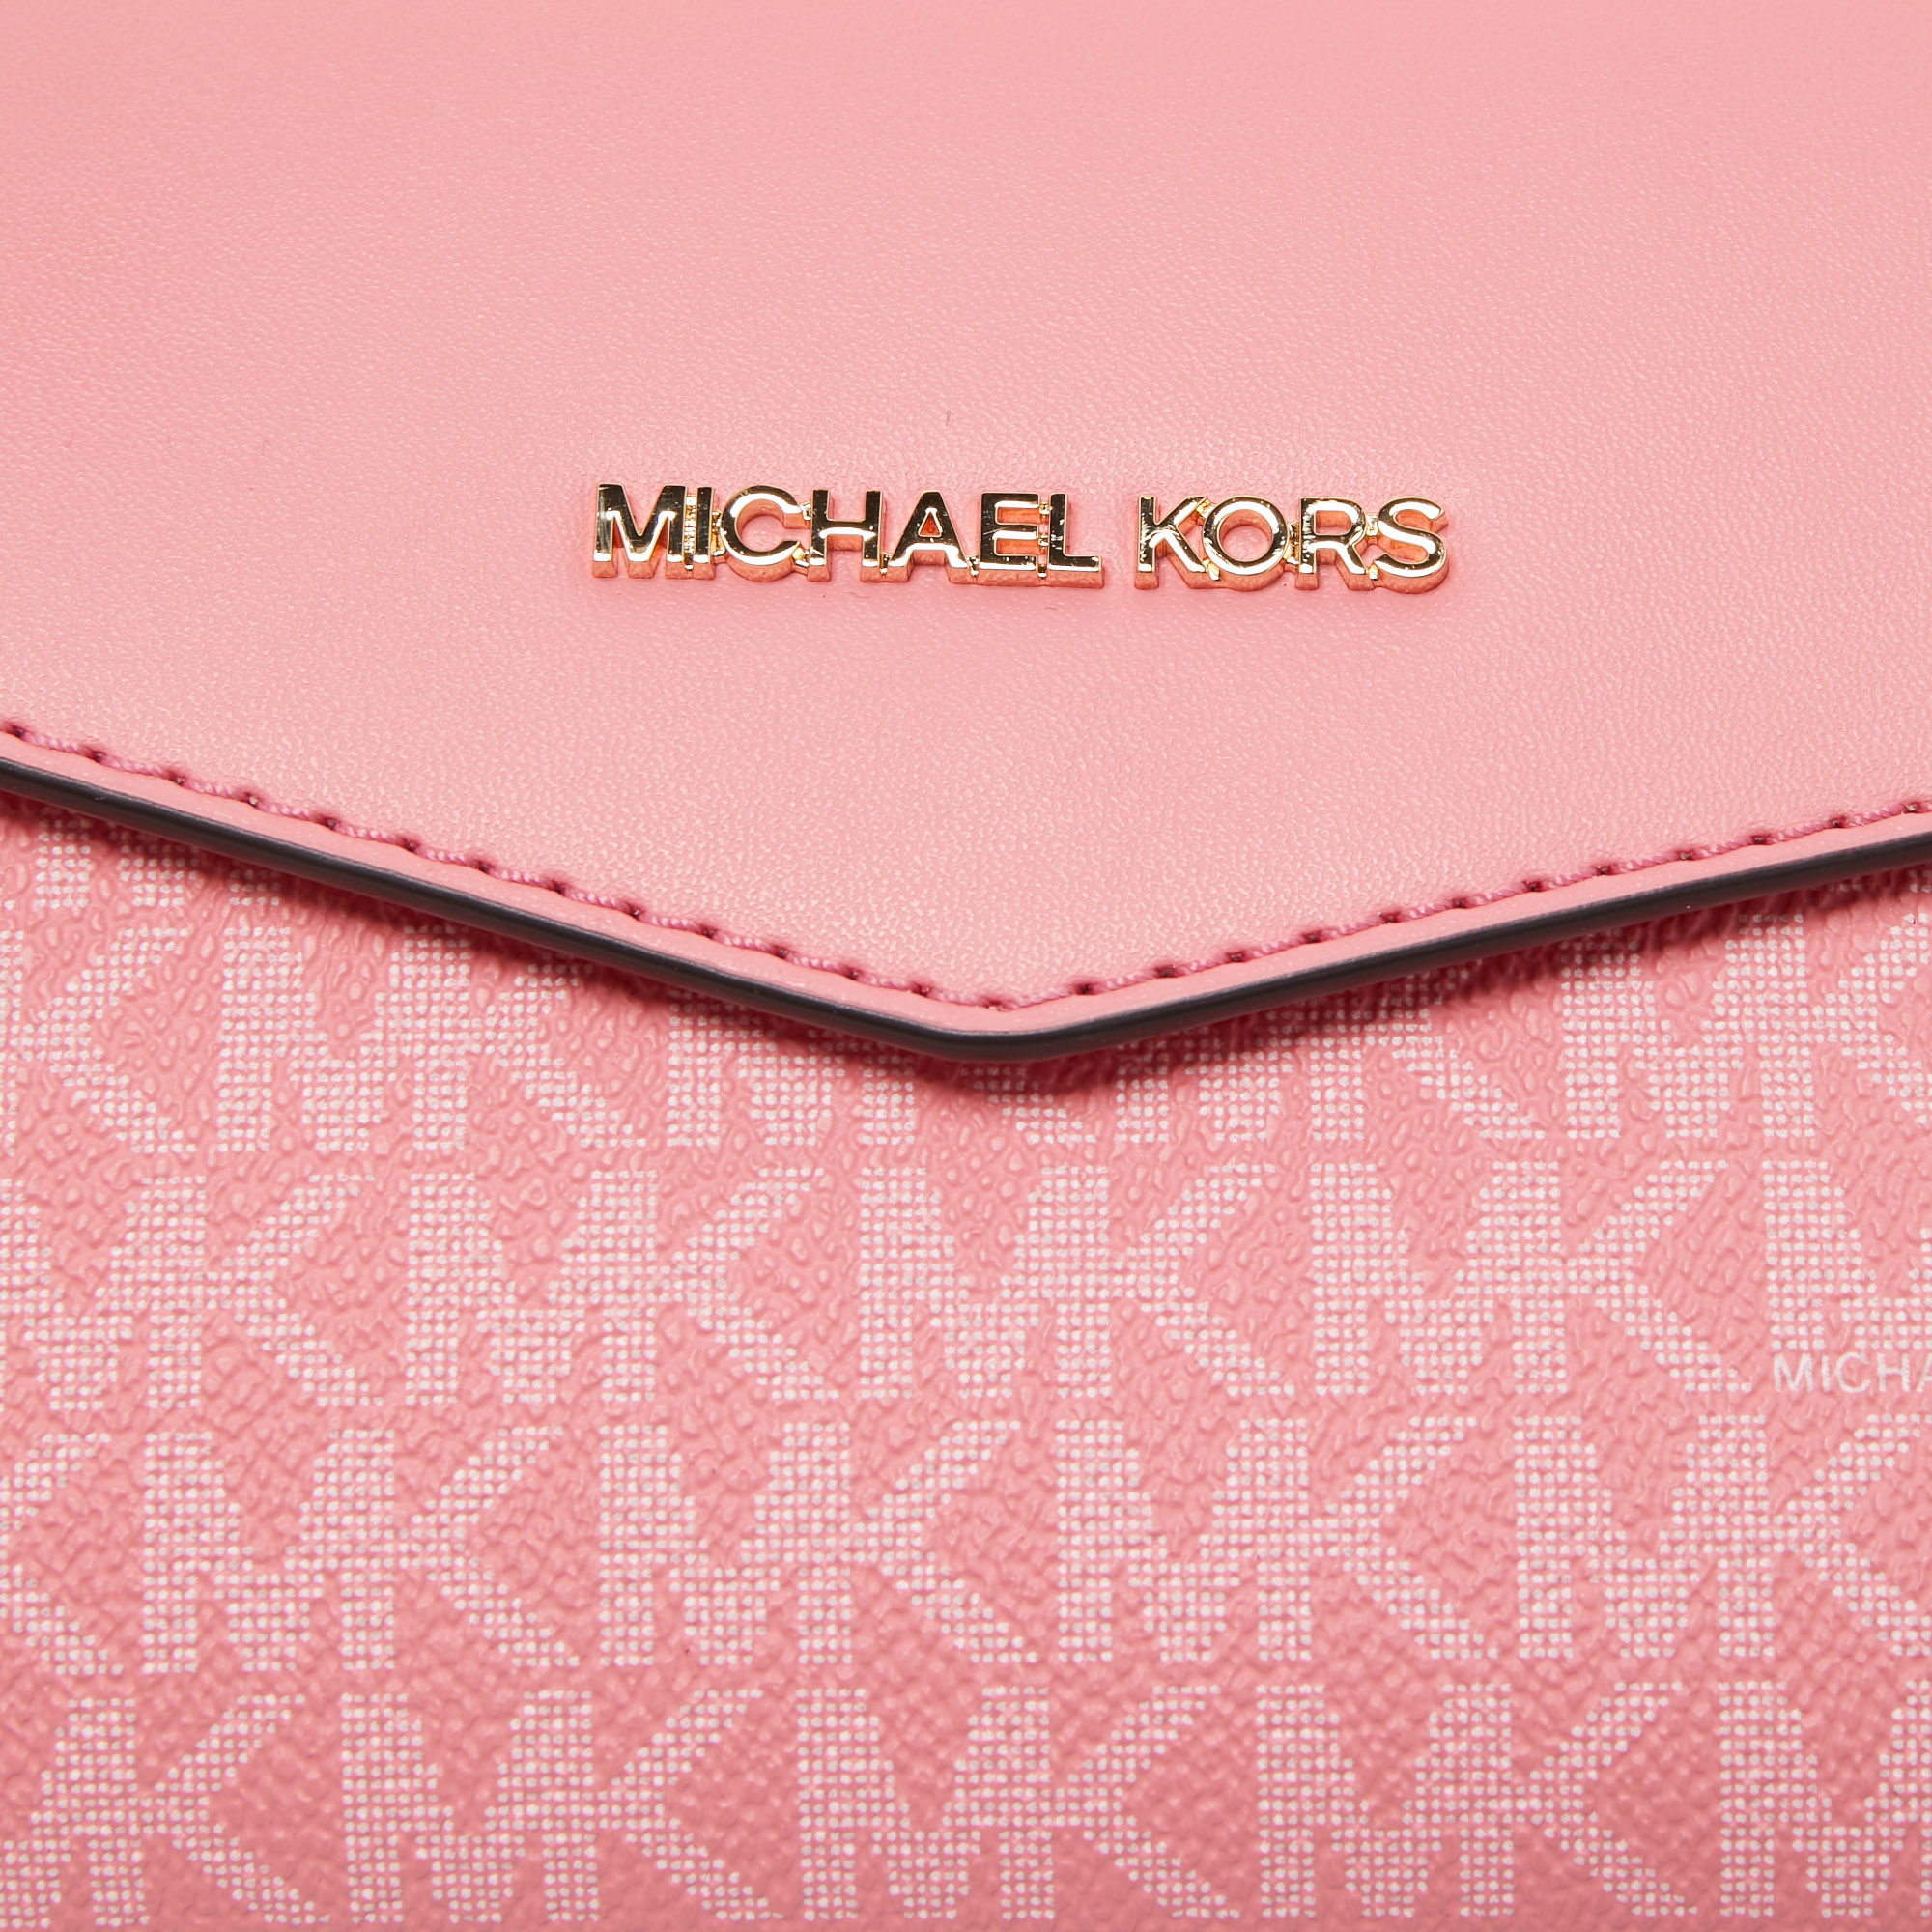 Michael Kors Pink Signature Coated Canvas and Leather Envelope Flap Clutch  Bag Michael Kors